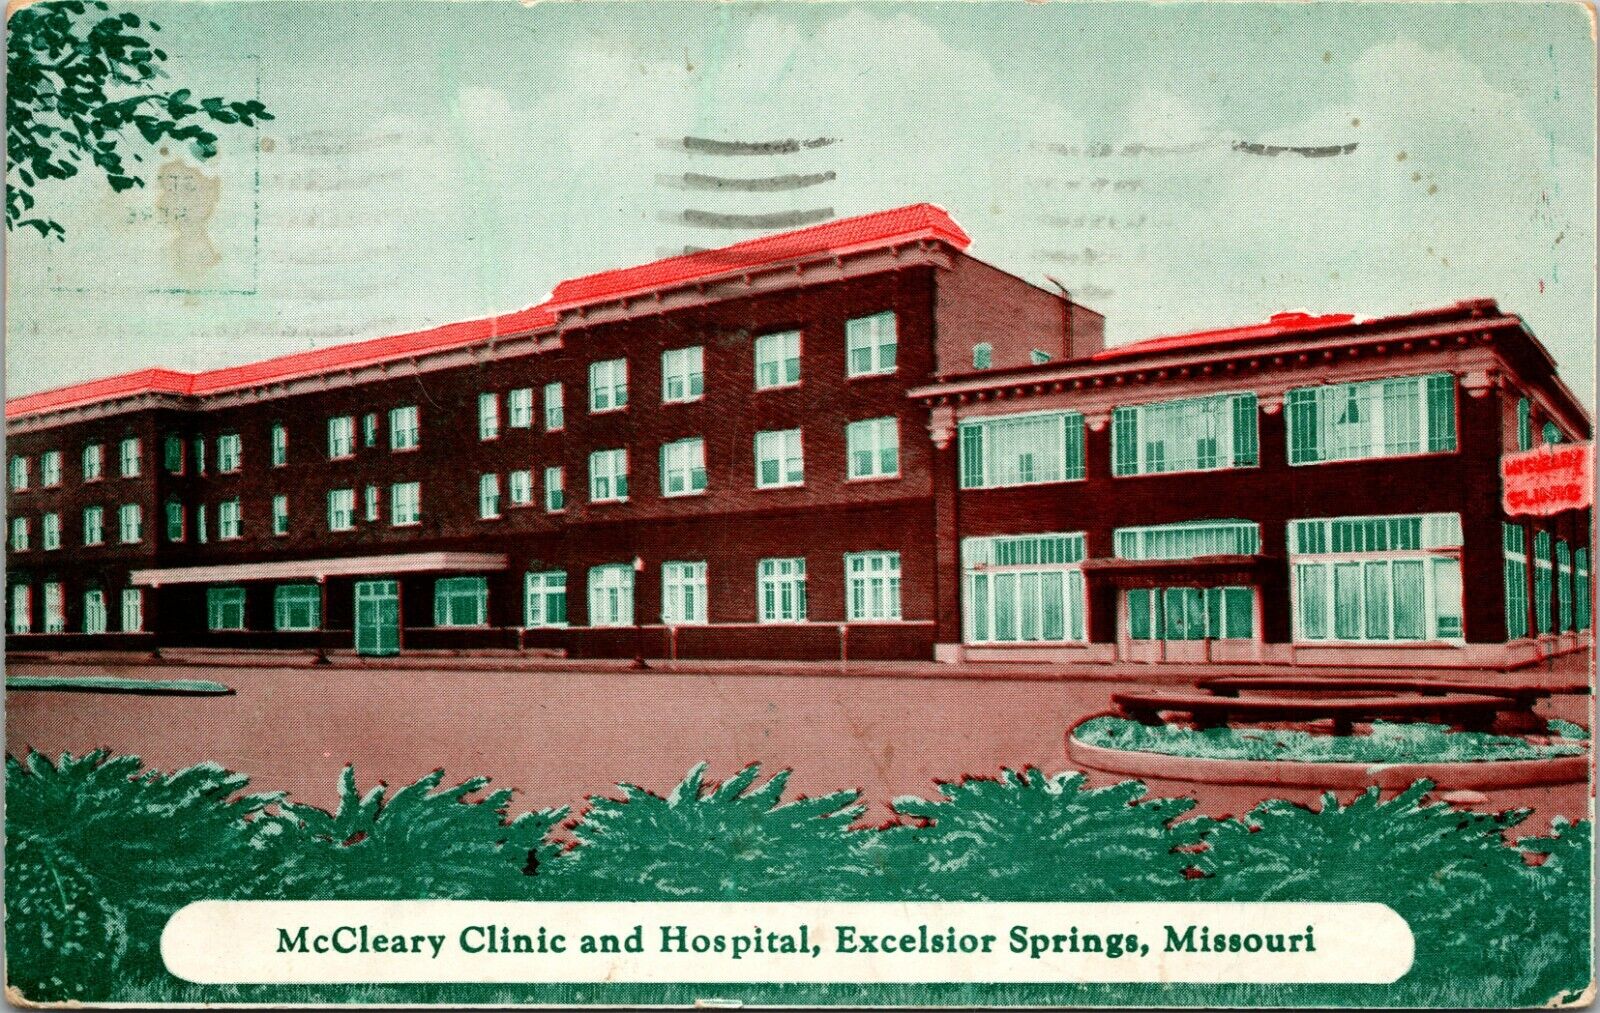 McCleary Clinic and Hospital, Excelsior Springs, Missouri